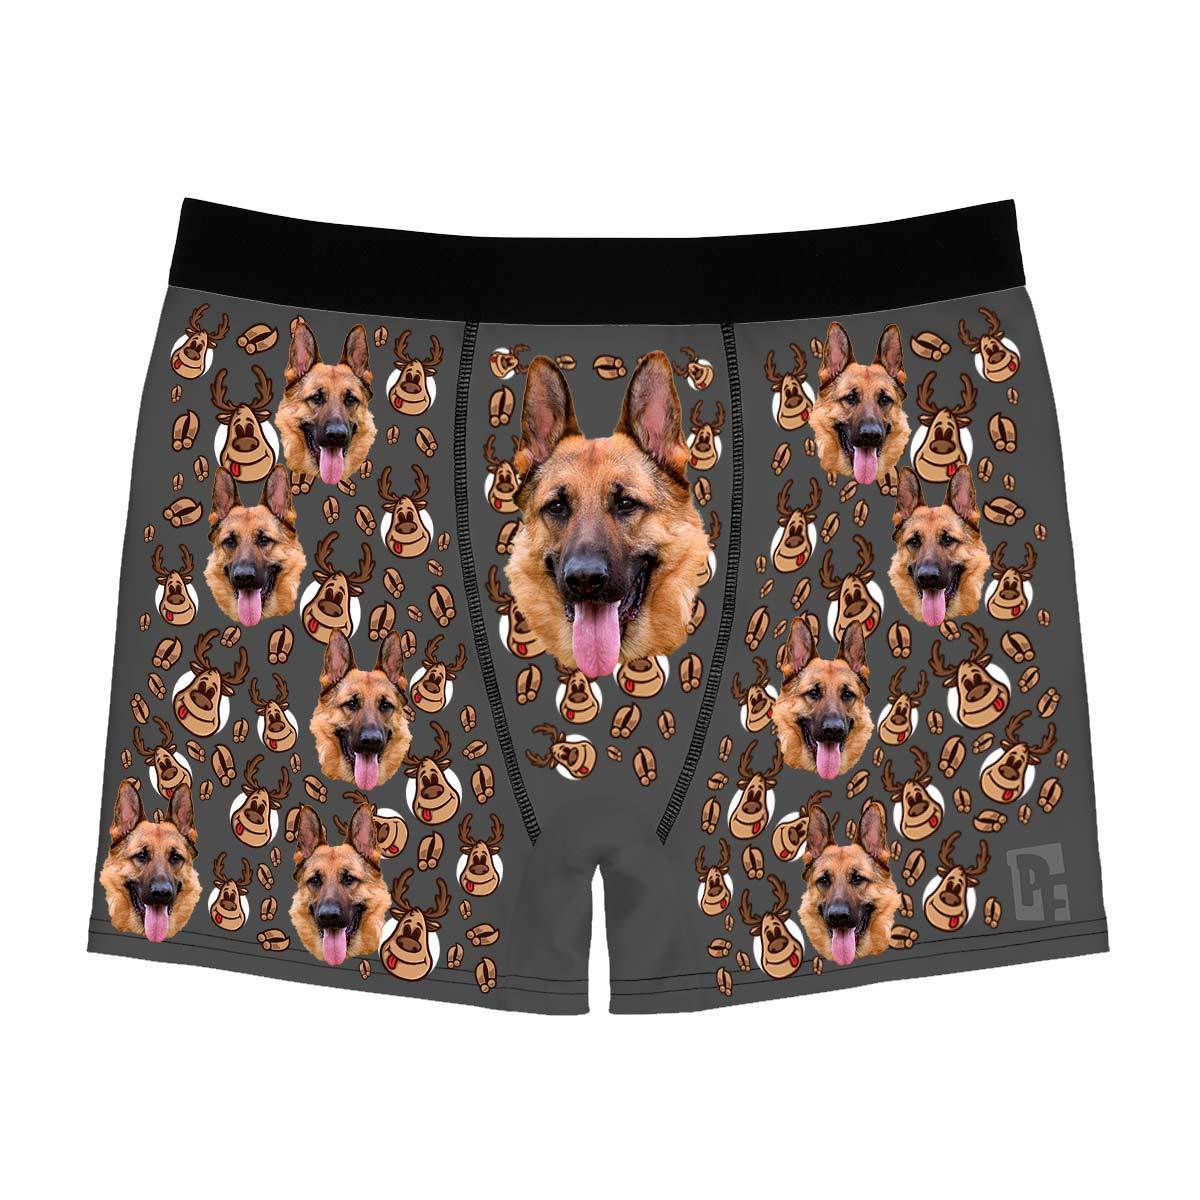 Dark Deer Hunter men's boxer briefs personalized with photo printed on them